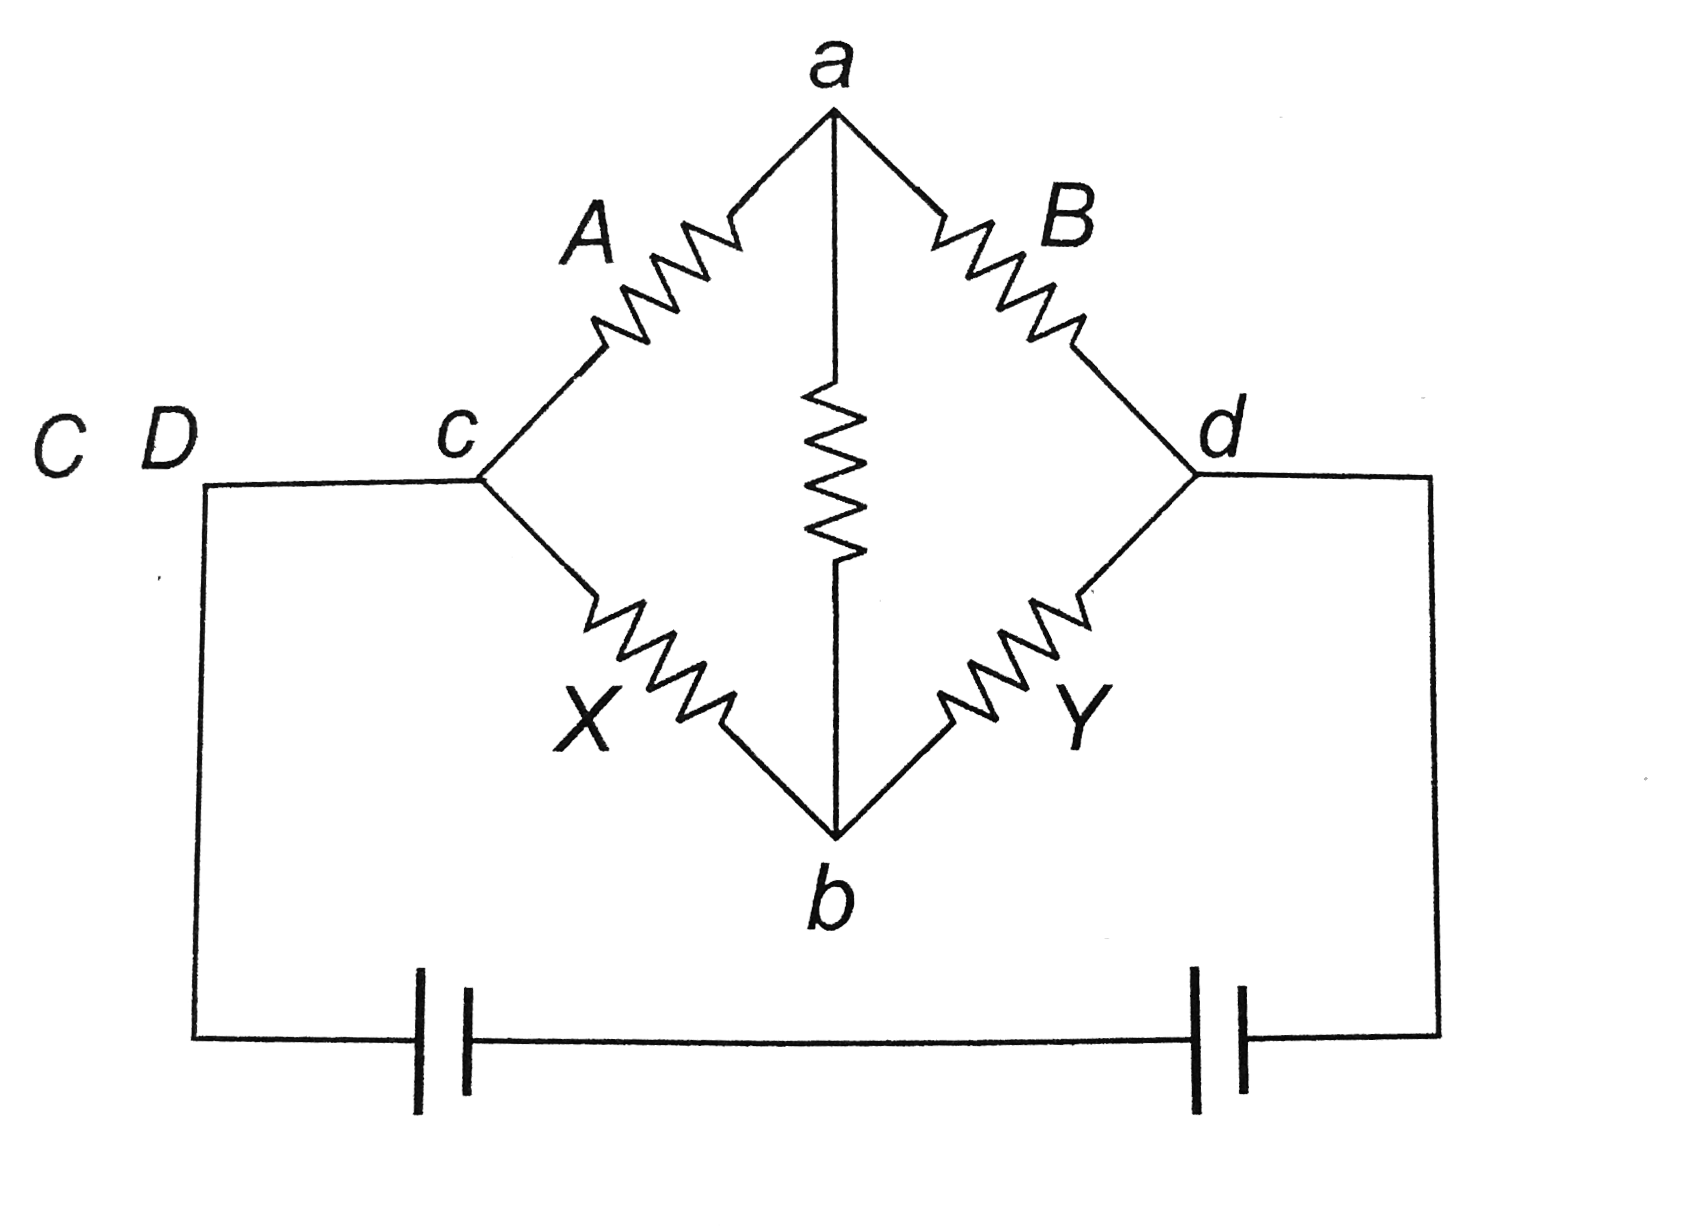 In the Wheatstone's bridge (shown in figure) X = Y and A gt B. The direction of the current between ab will be